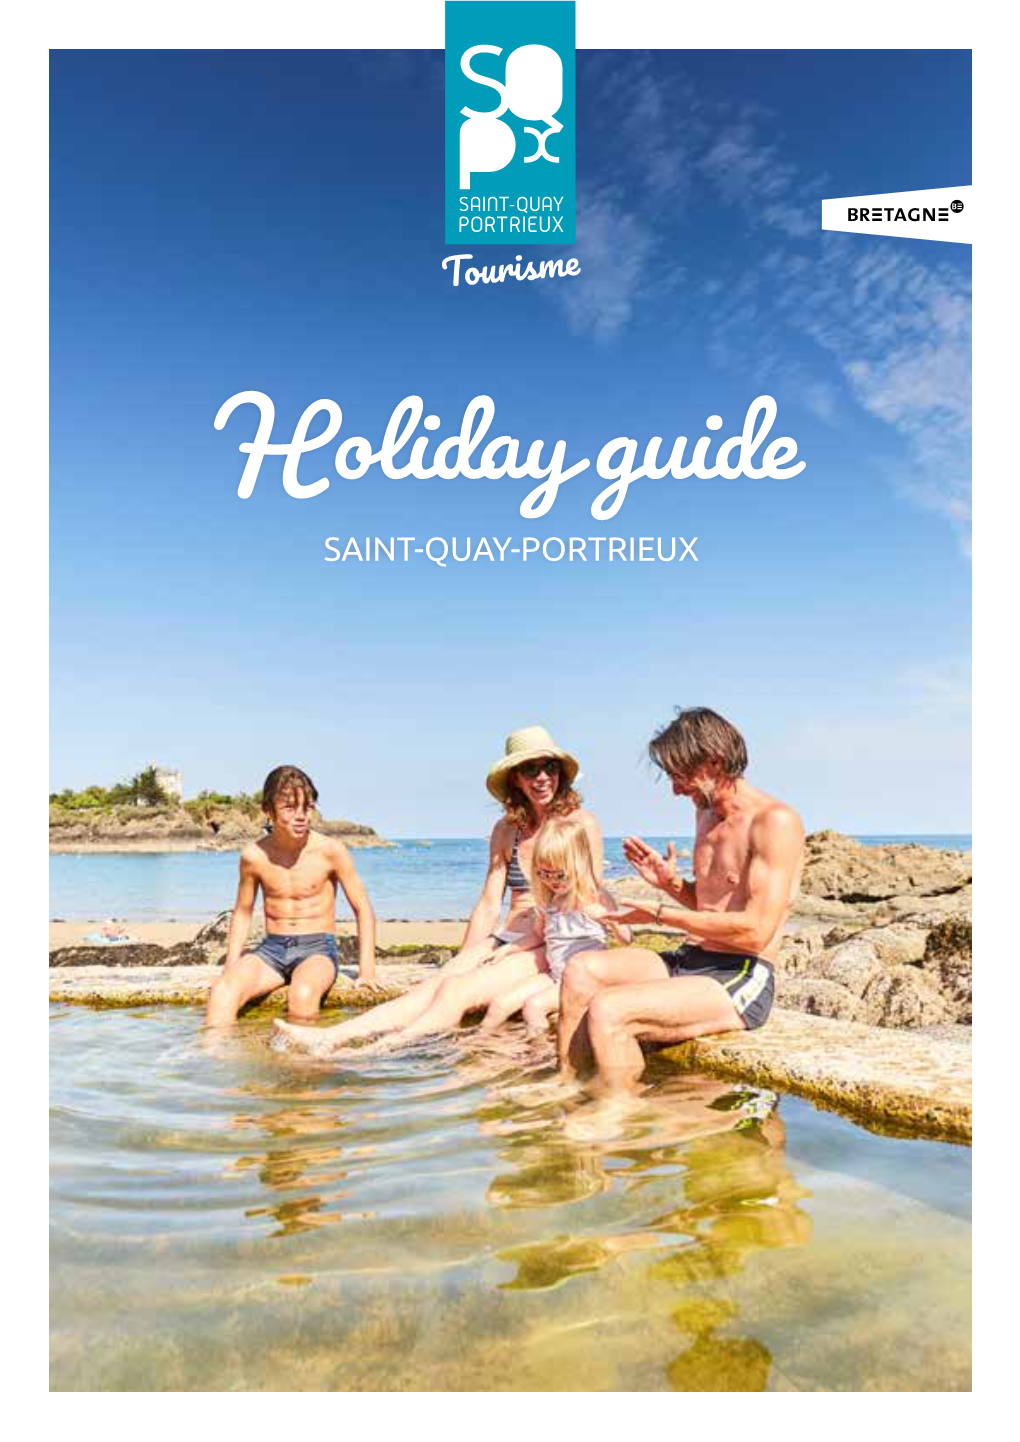 Holiday Guide SAINT-QUAY-PORTRIEUX Contents